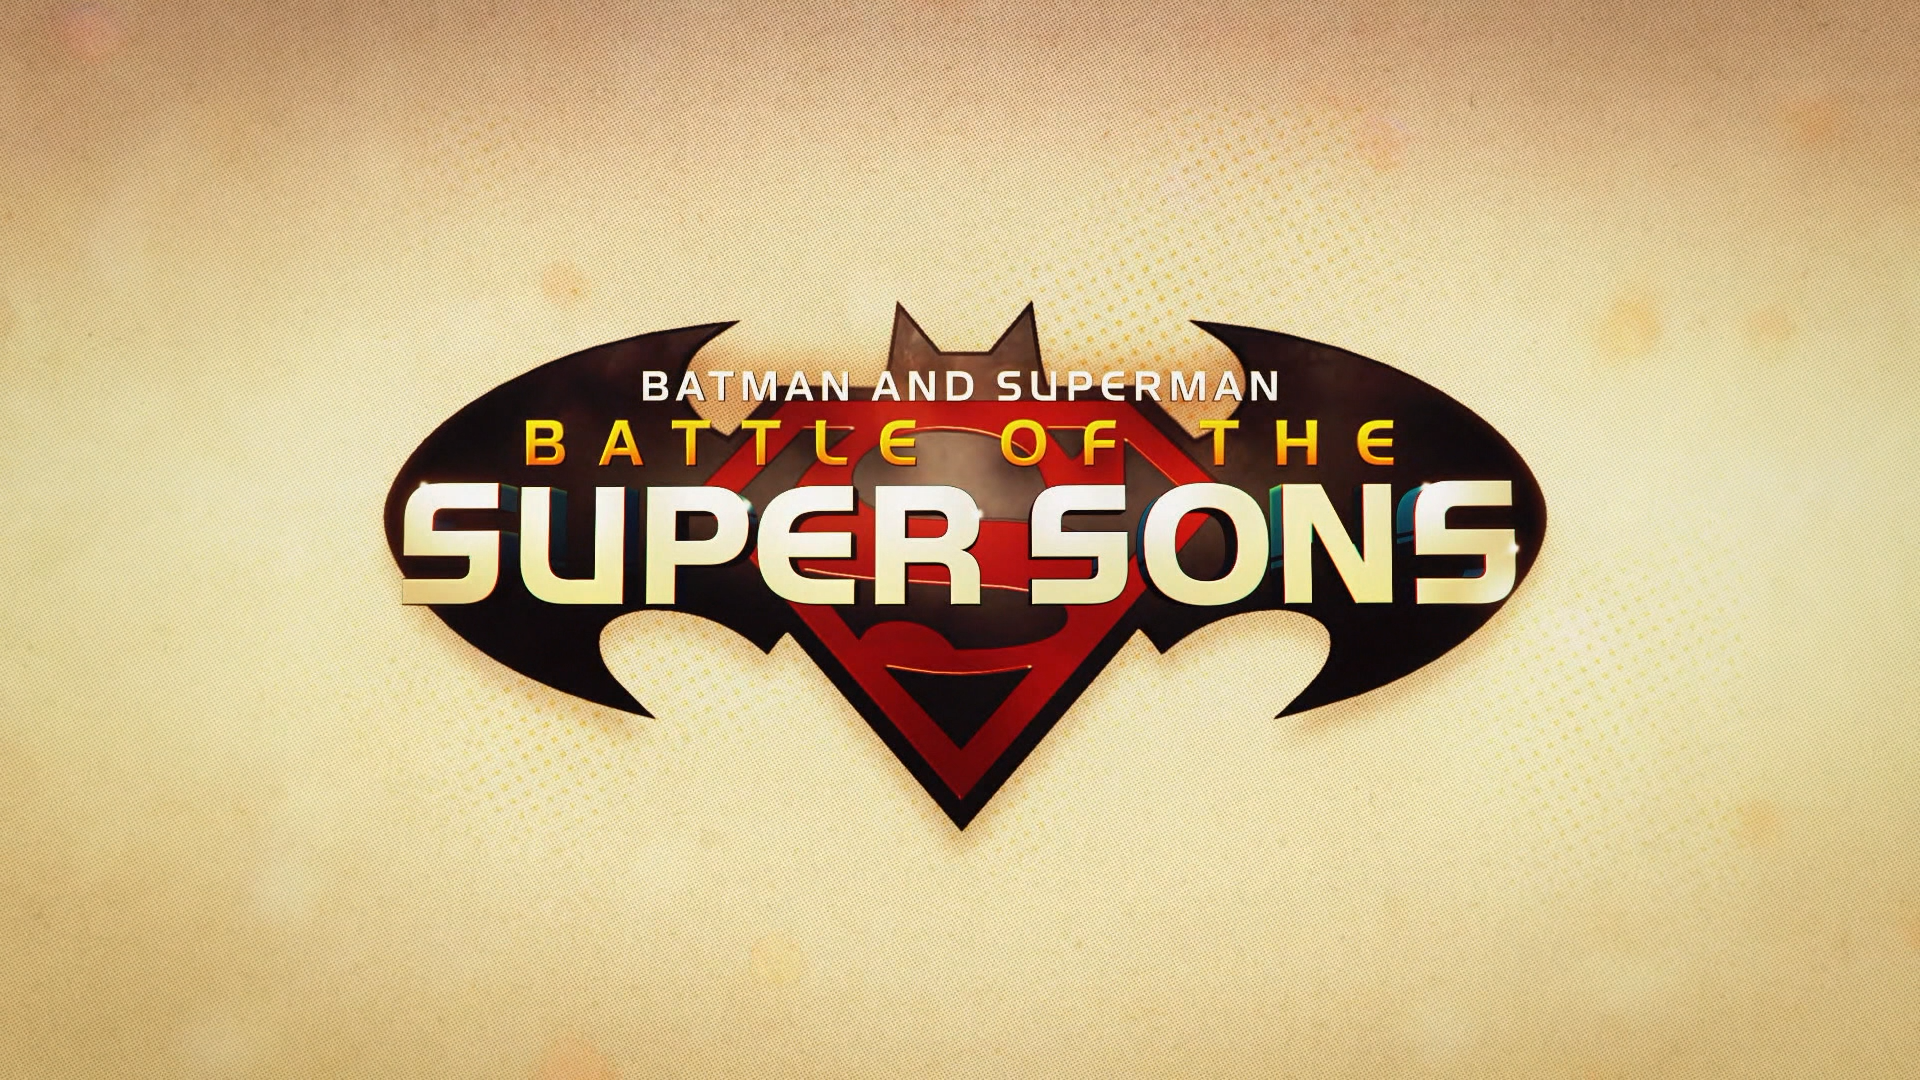 Batman And Superman: Battle Of The Super Sons 4K Ultra HD & Blu Ray Review's Guide To The Movies